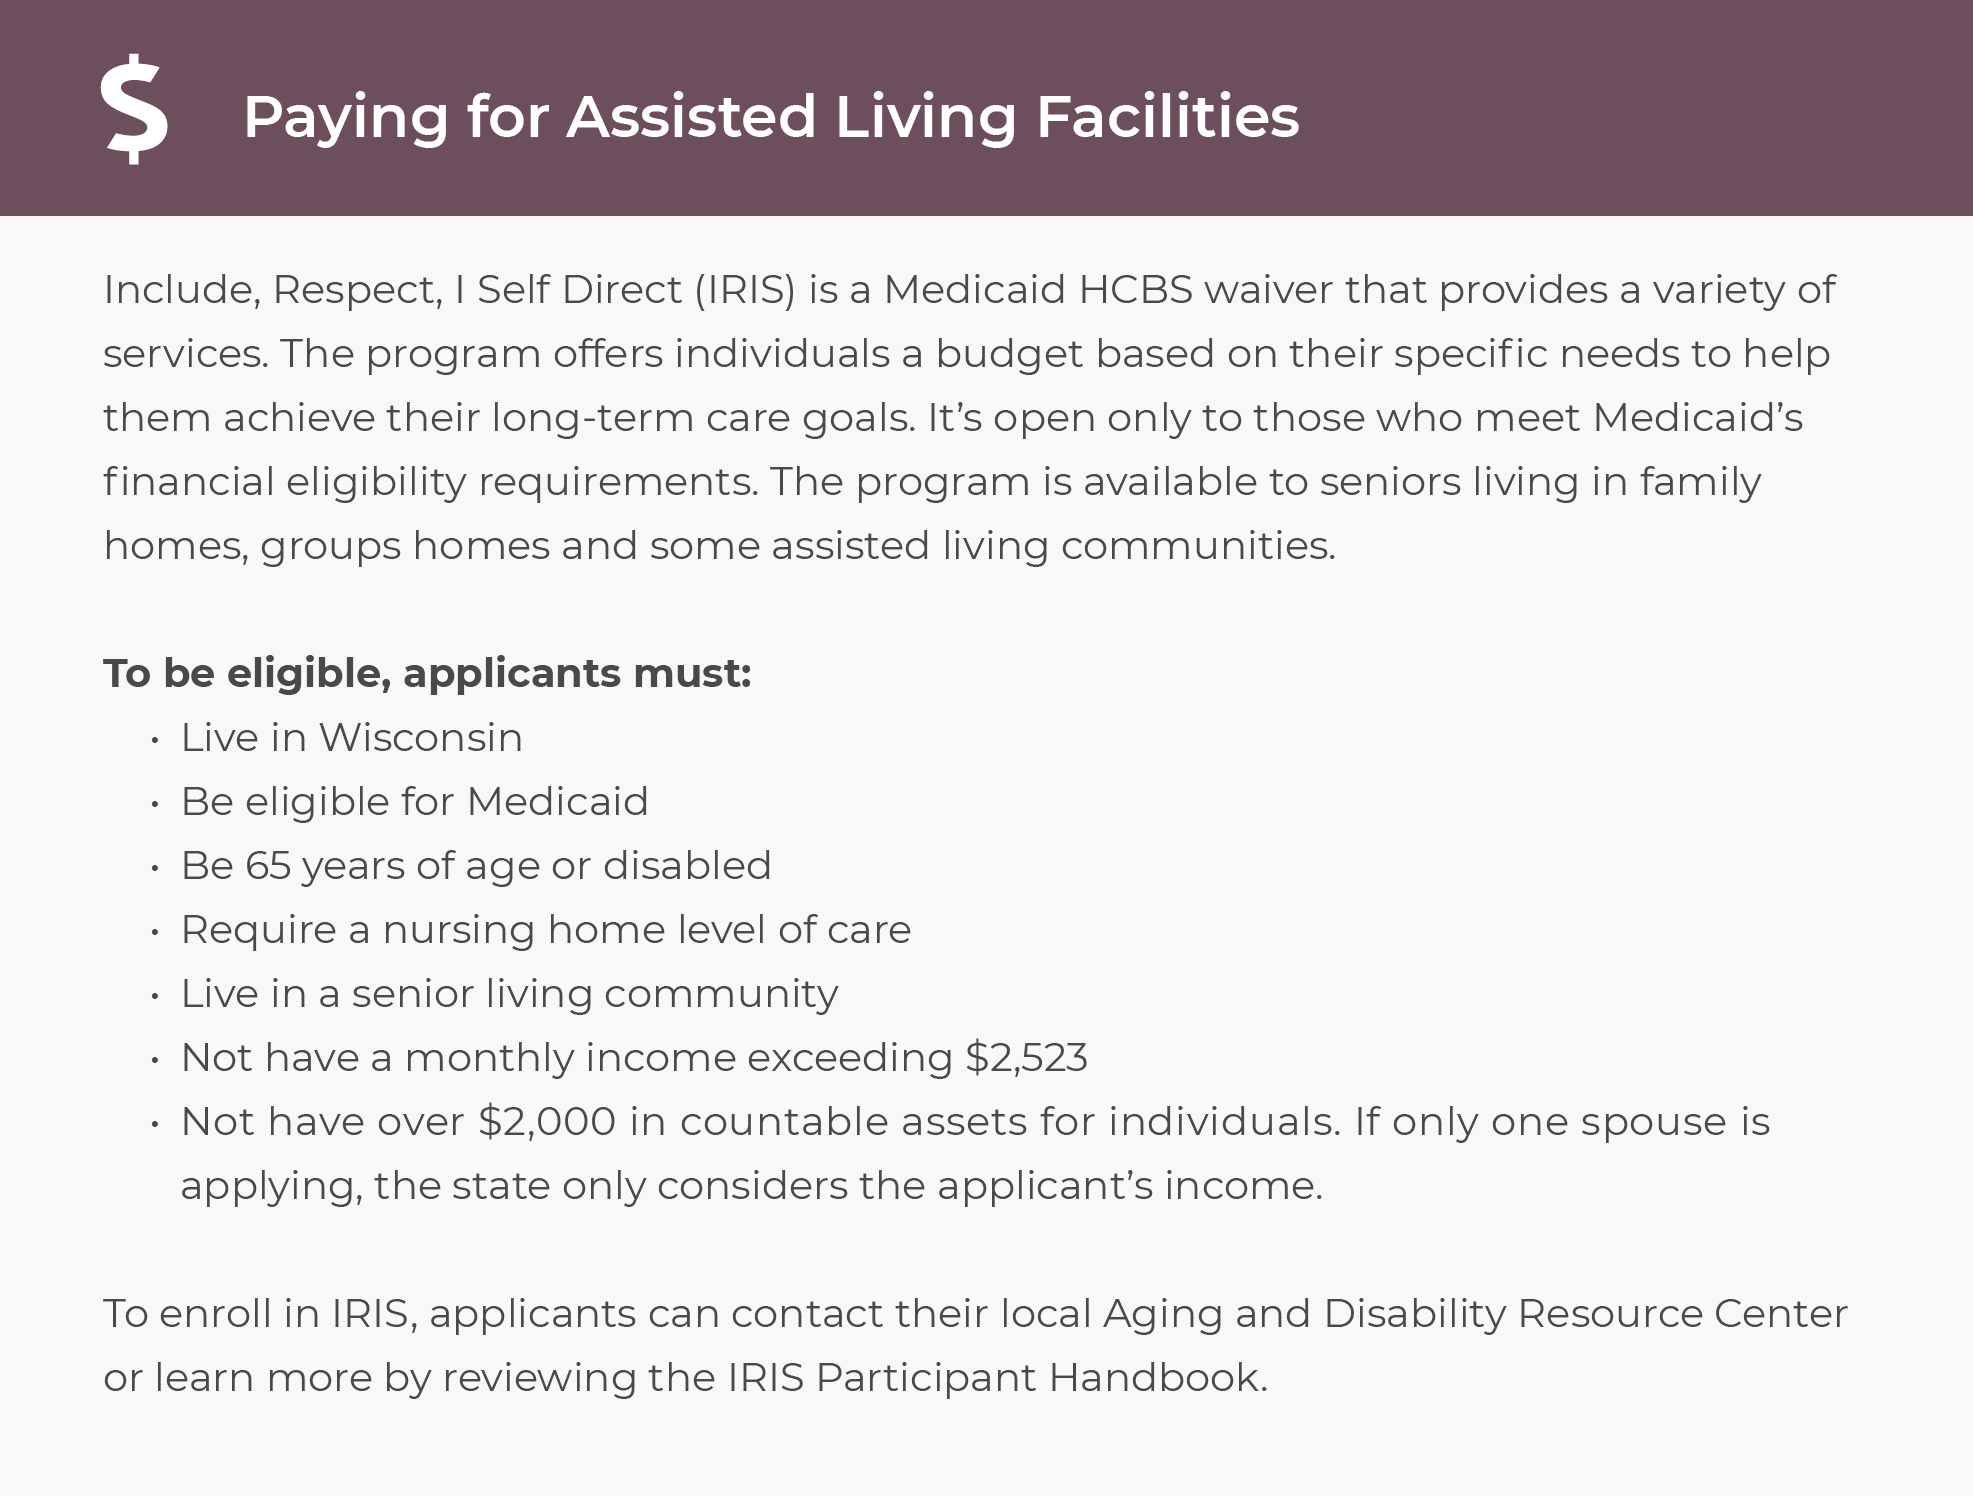 More ways to pay for Assisted Living in Wisconsin